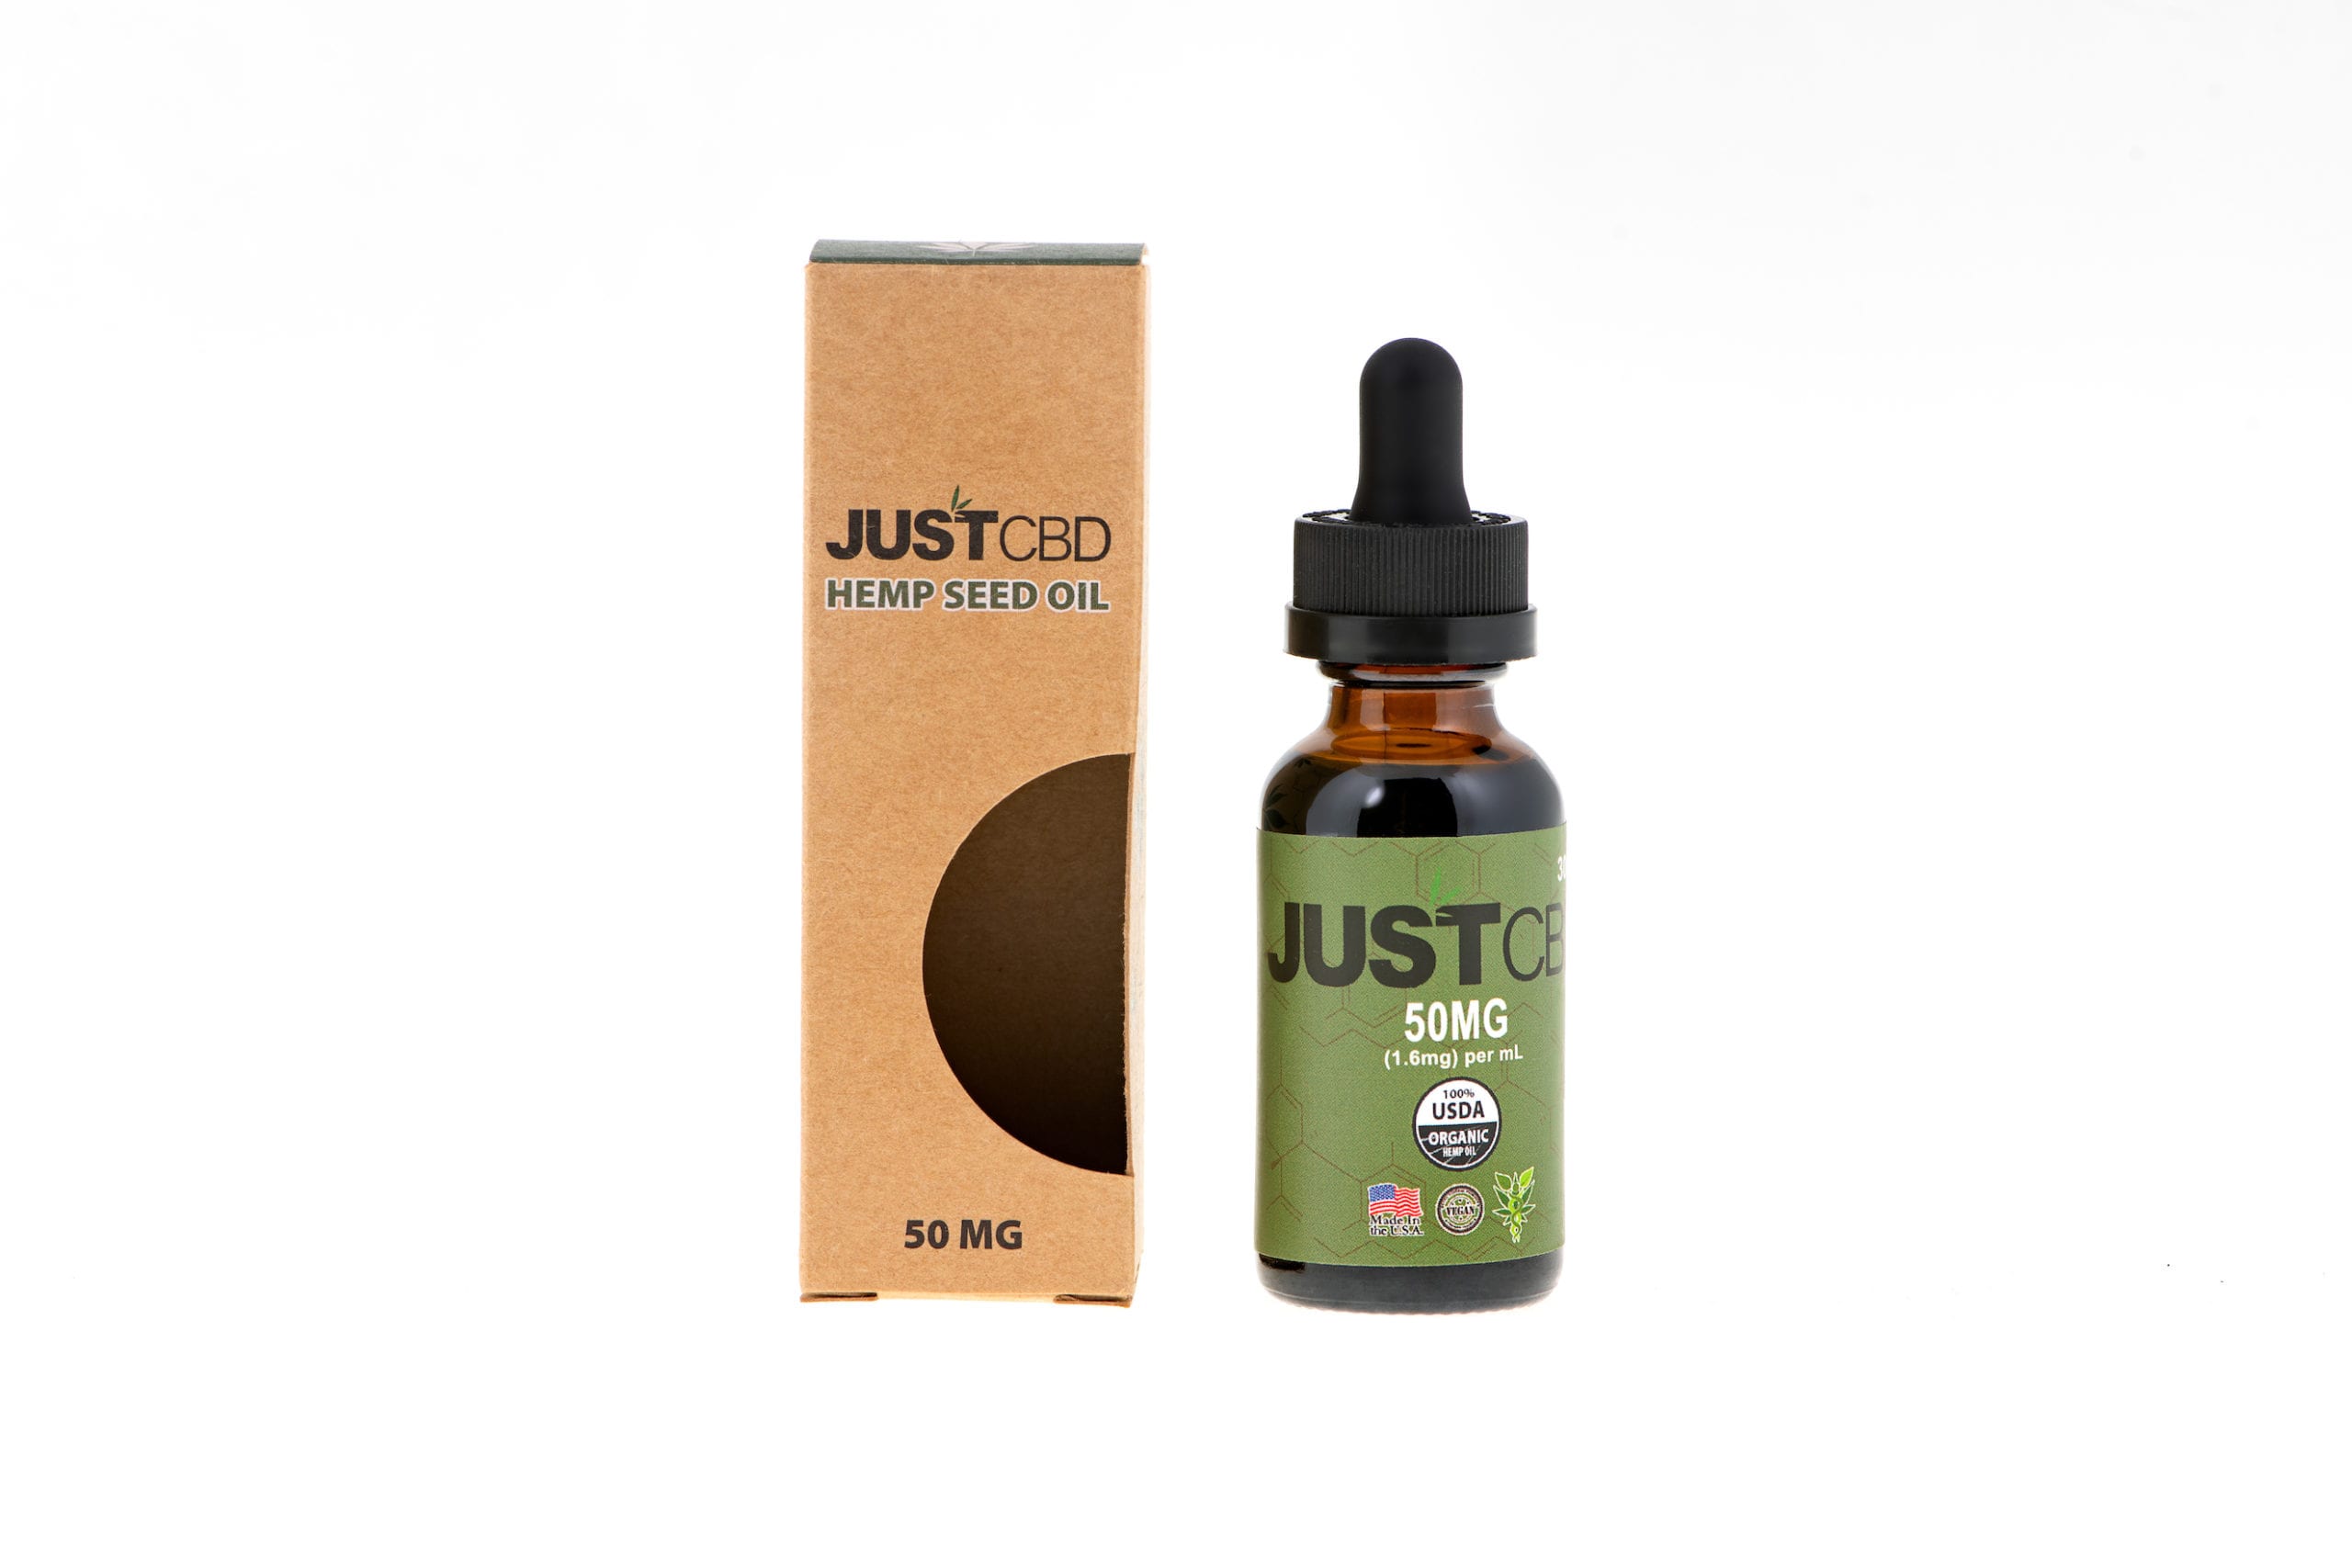 IU C&I Studios Portfolio JustCBD Product Photography and Just CBD Products Closeup of JUST CBD Hemp Seed Oil drops bottle with package